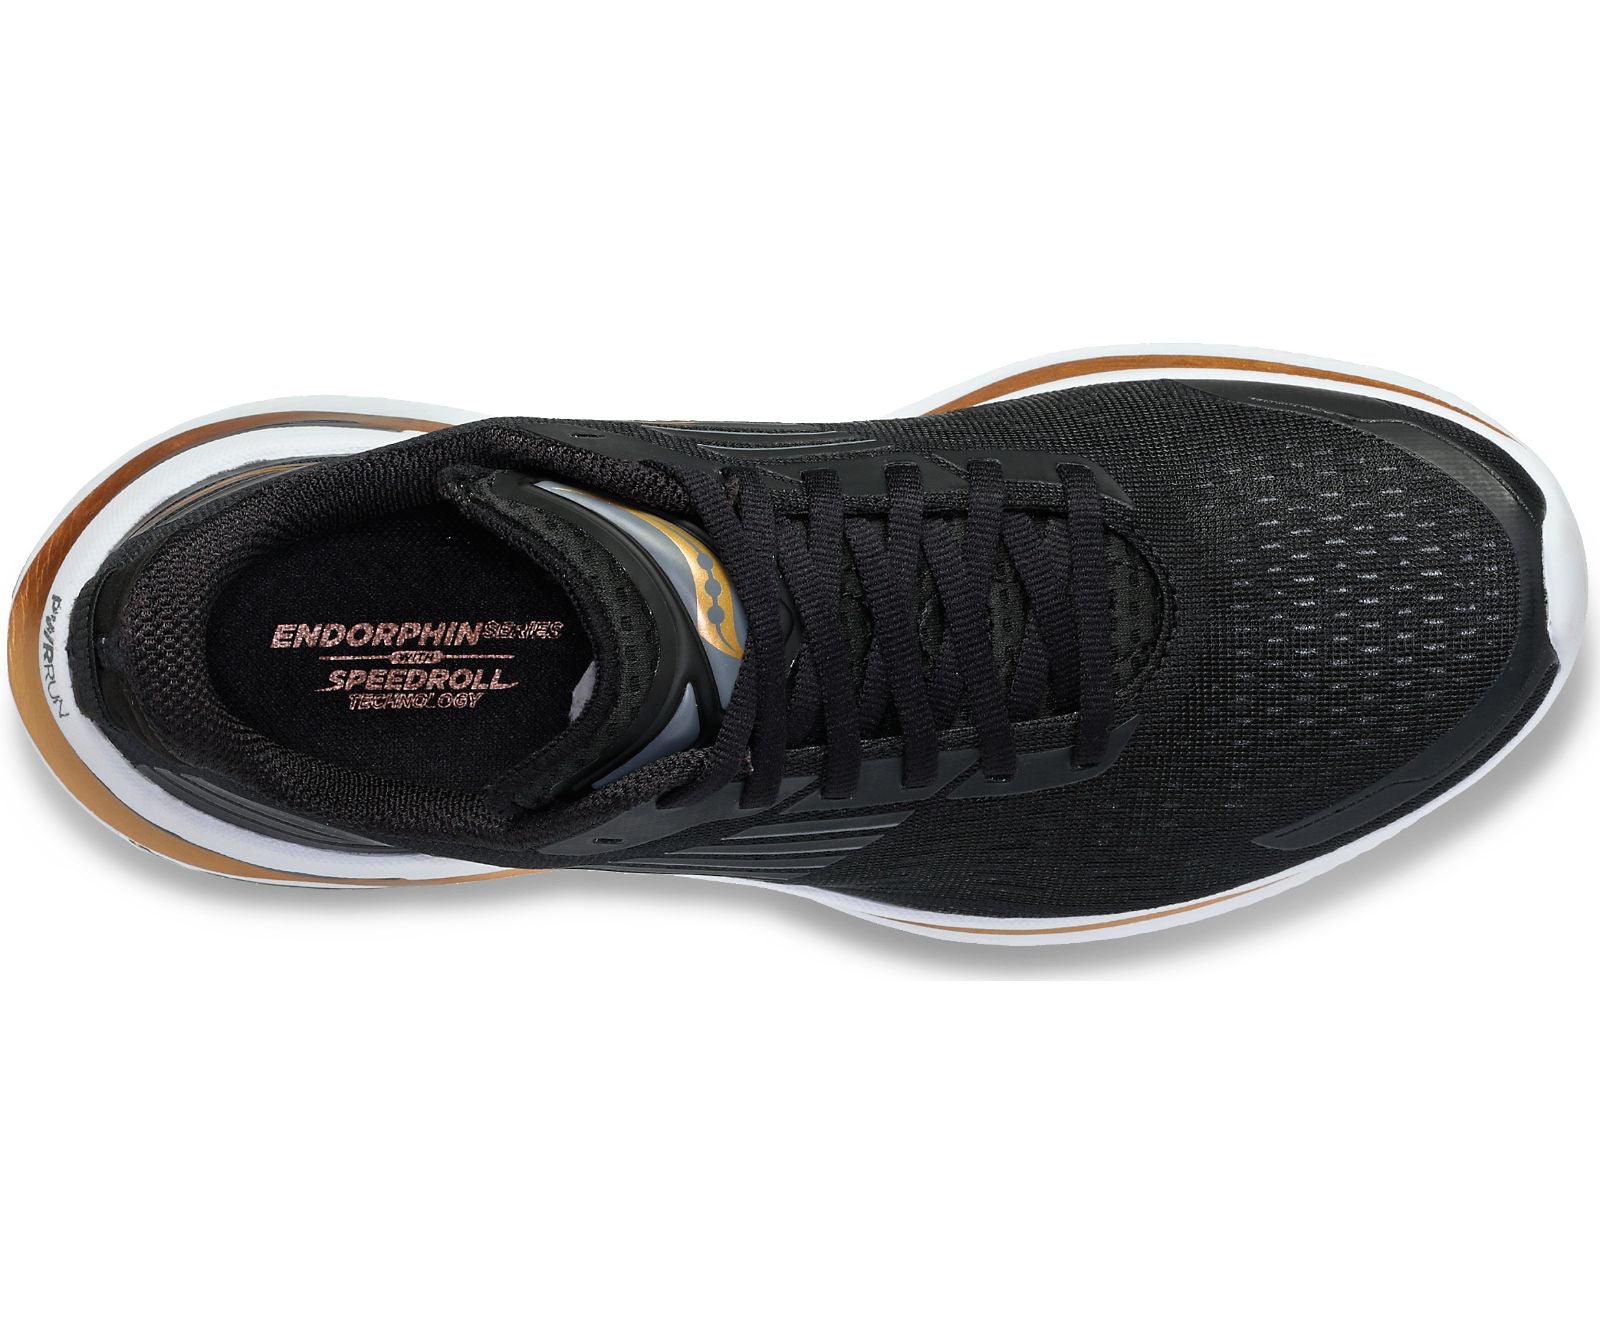 Top view of the Men's Saucony Endorphin Shift 3 in the color Black/Goldstruck